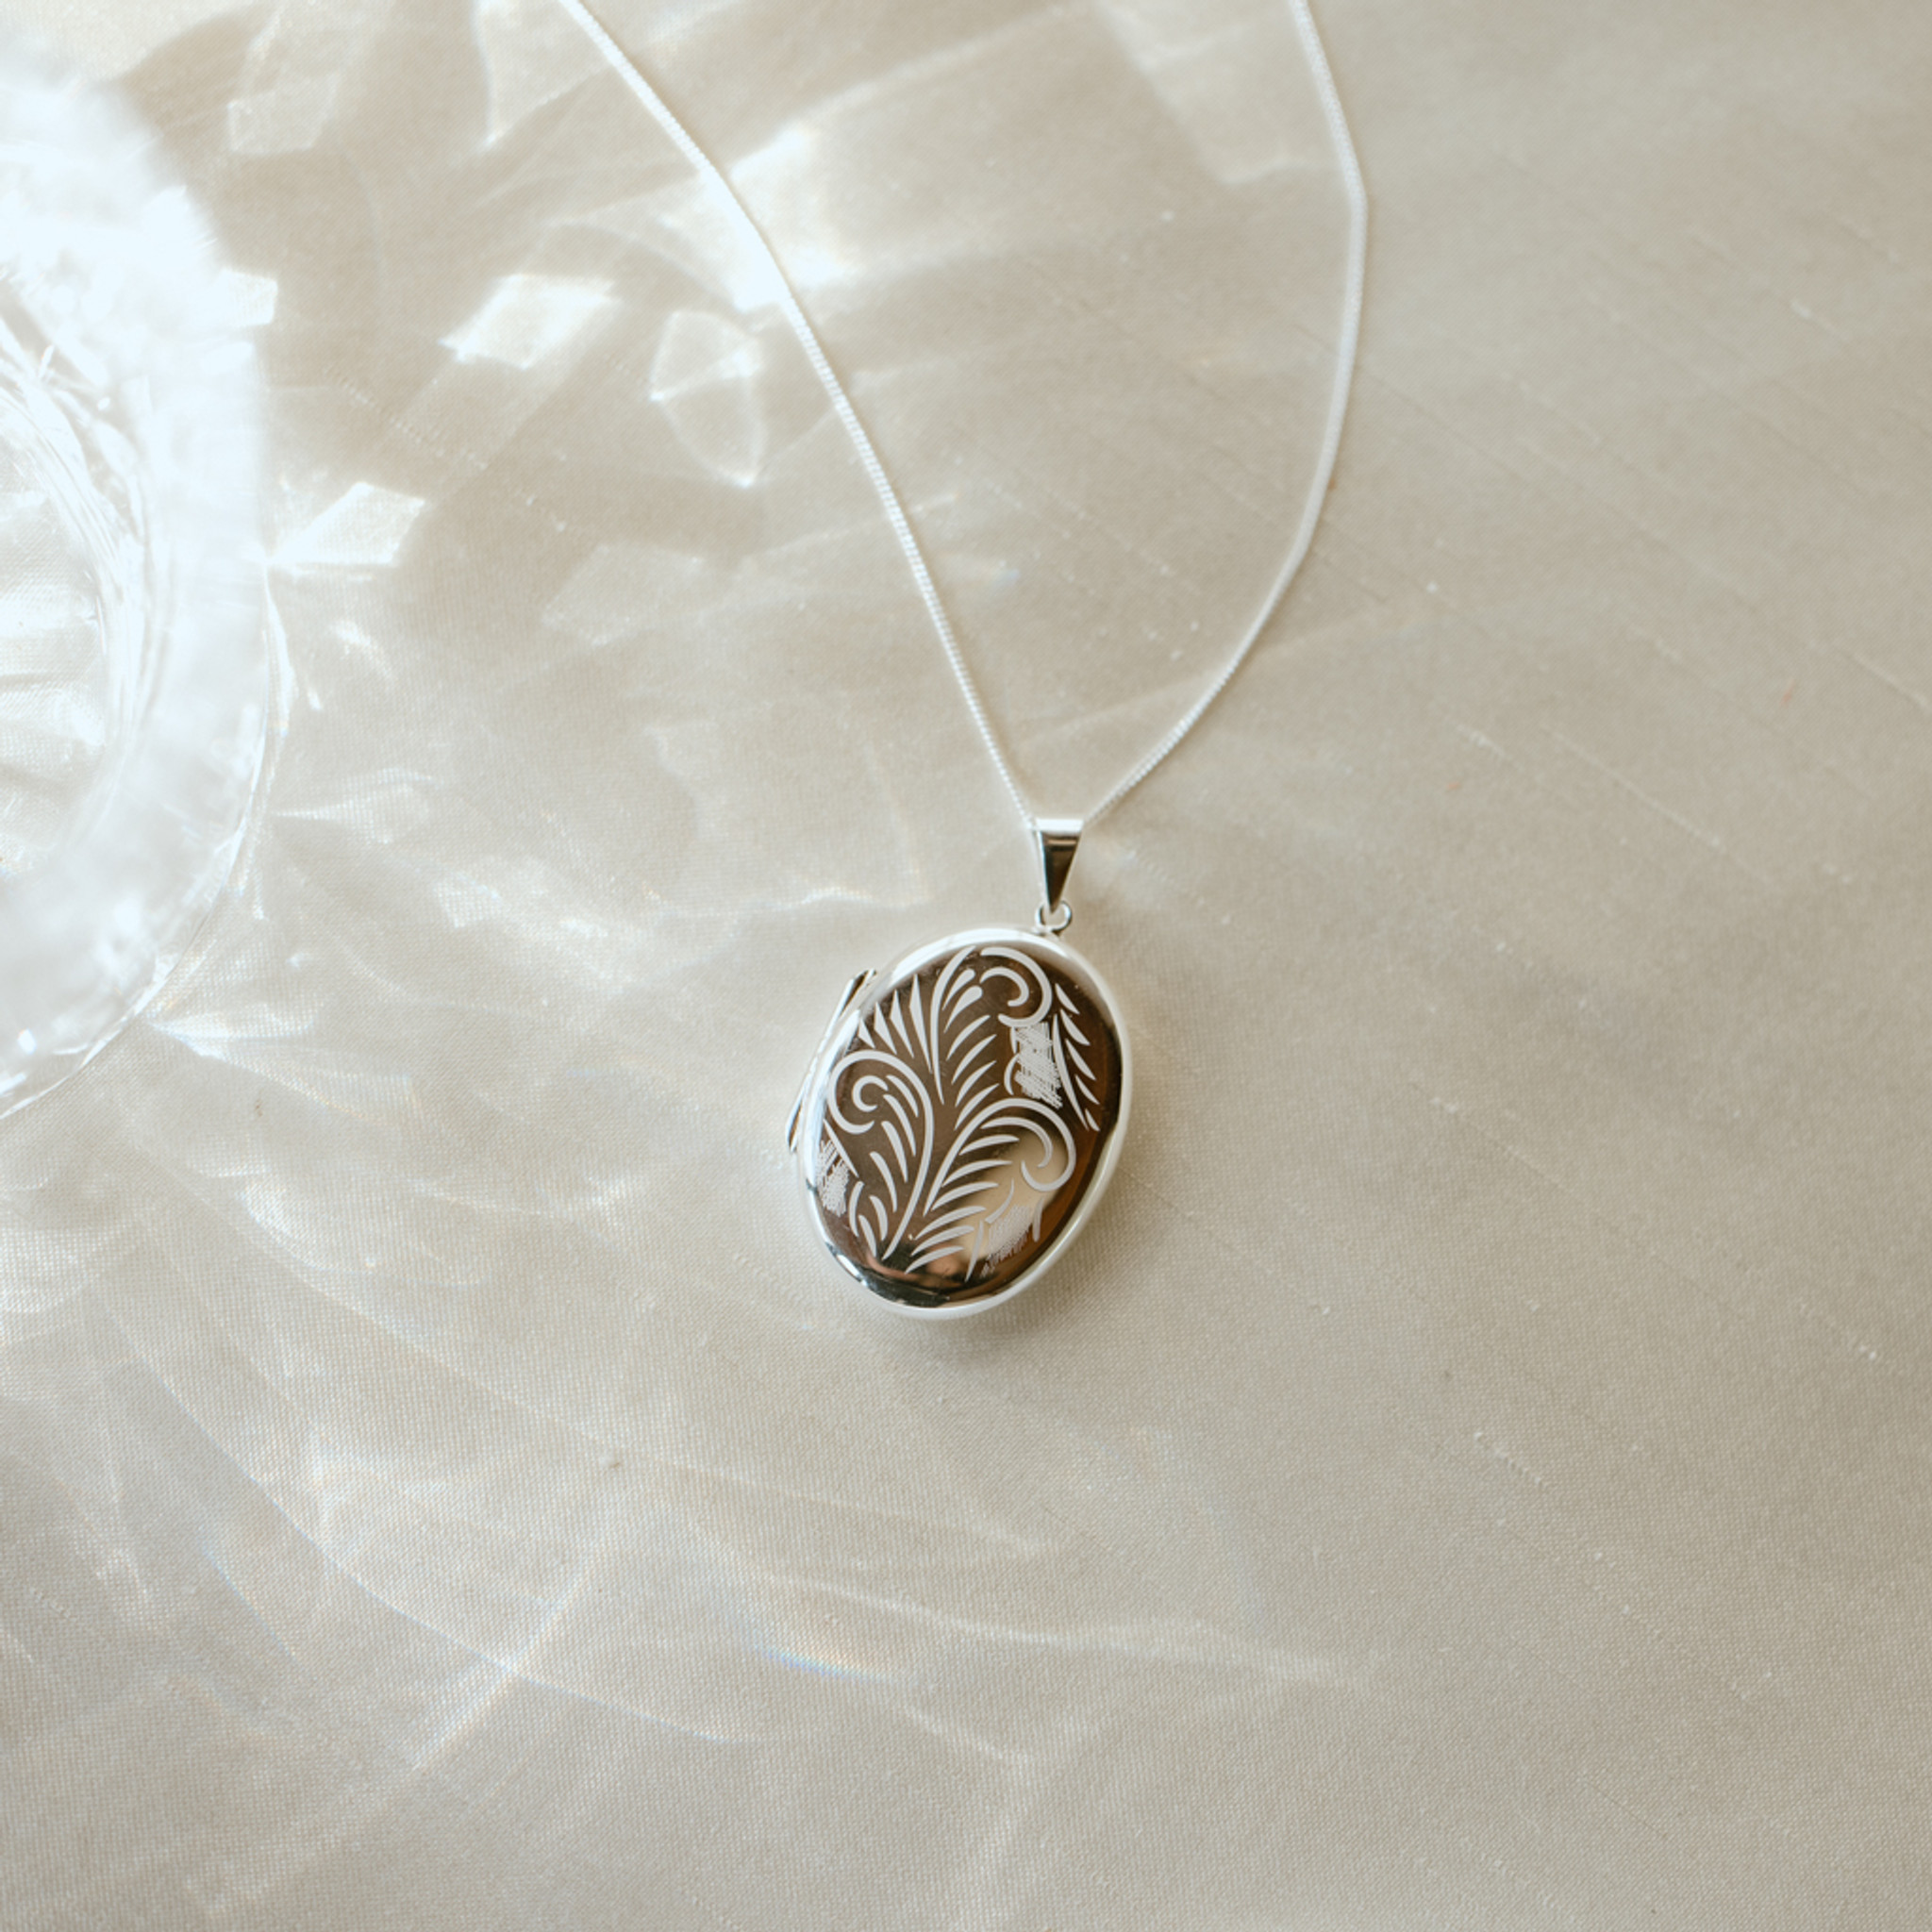 Engraved Oval Locket in Sterling Silver